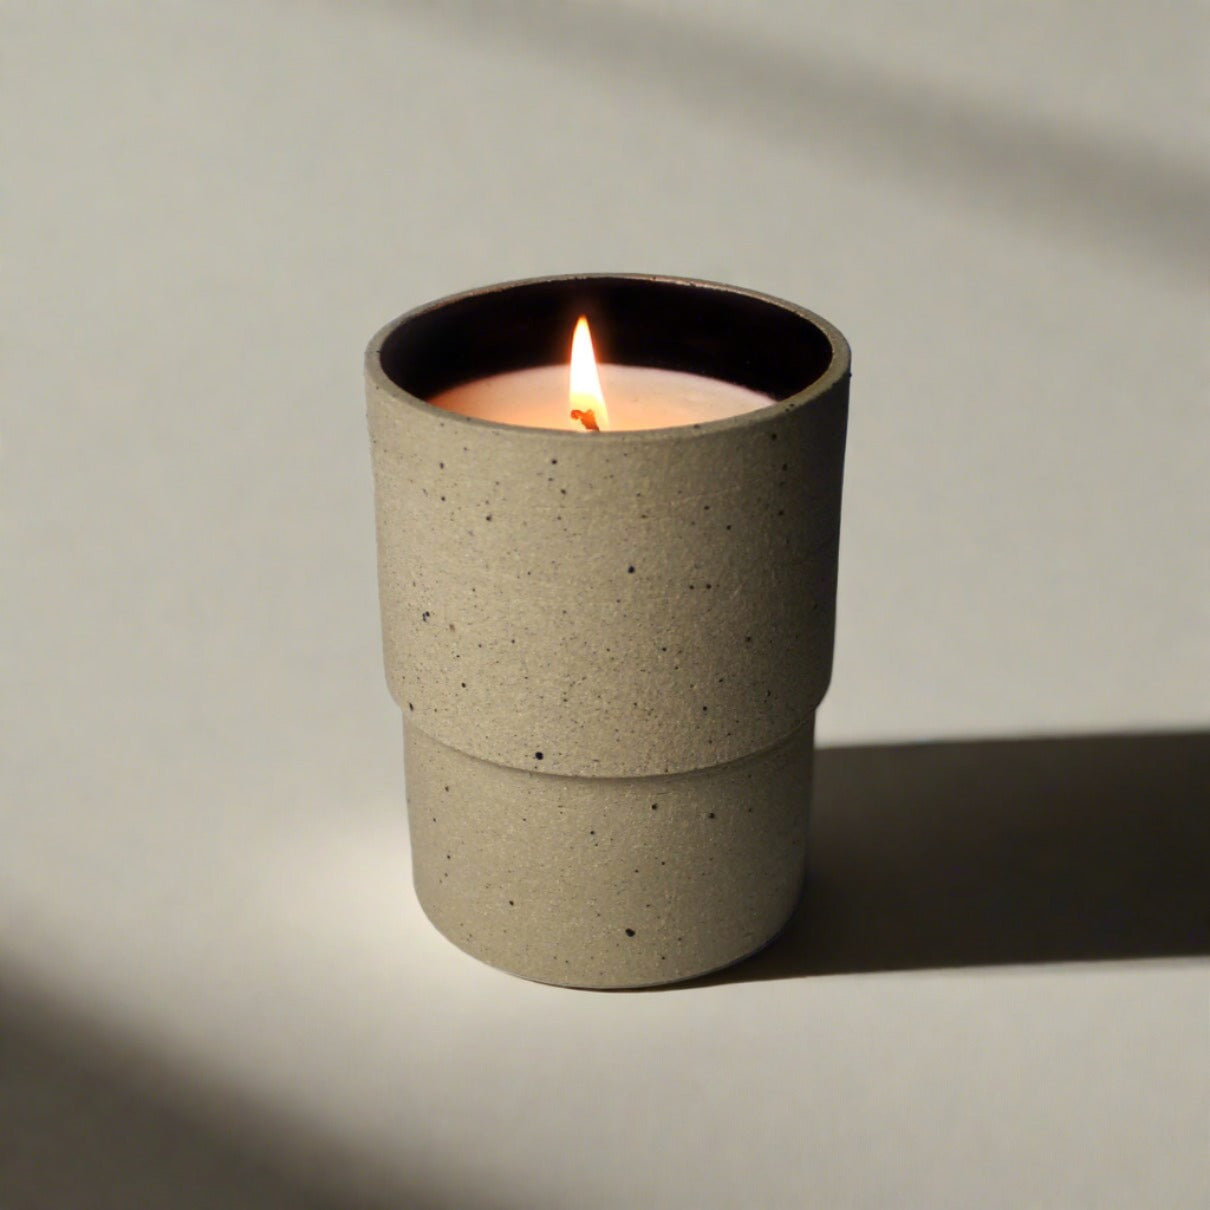 AHLT x Silver Ceramics Candle Candle A House Like This 